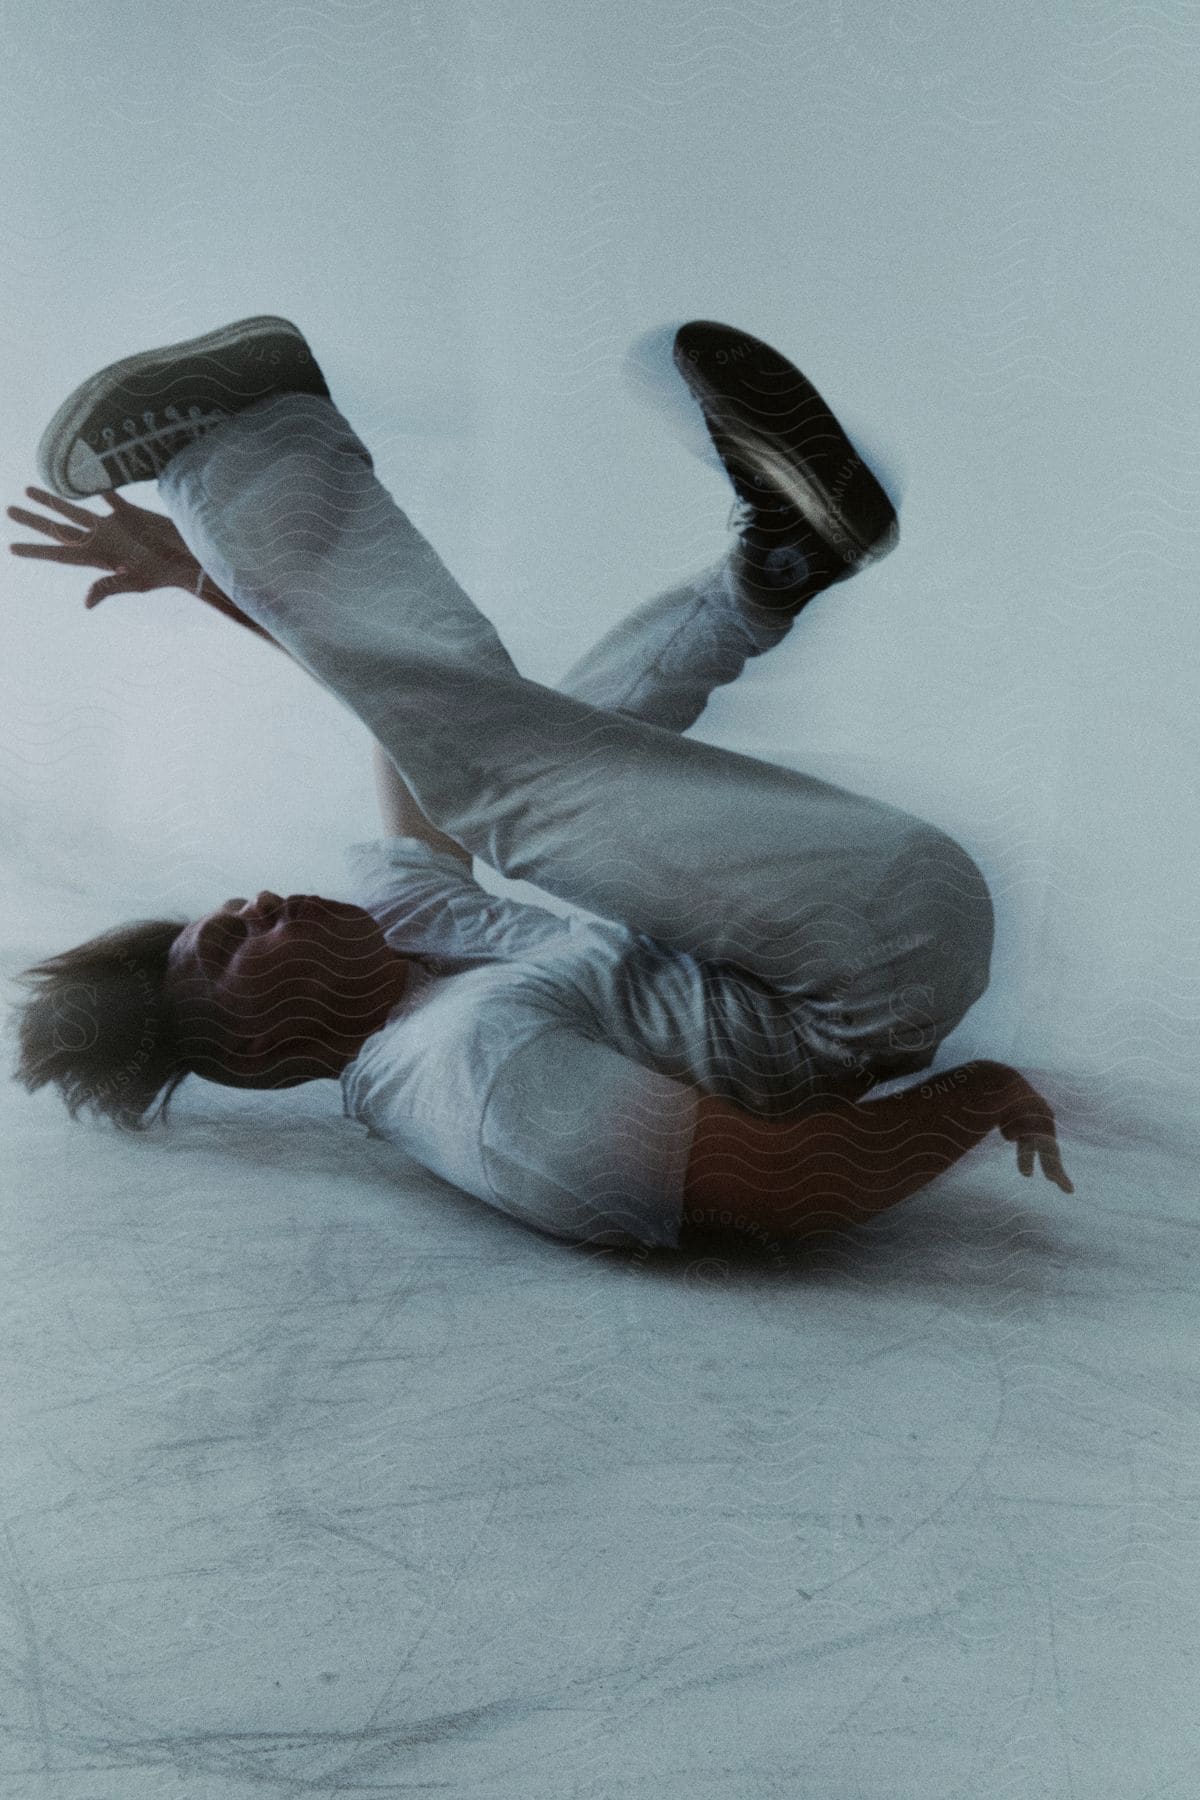 Stock photo of man lying with his back on the floor in breakdancing movement in an indoor room with white walls